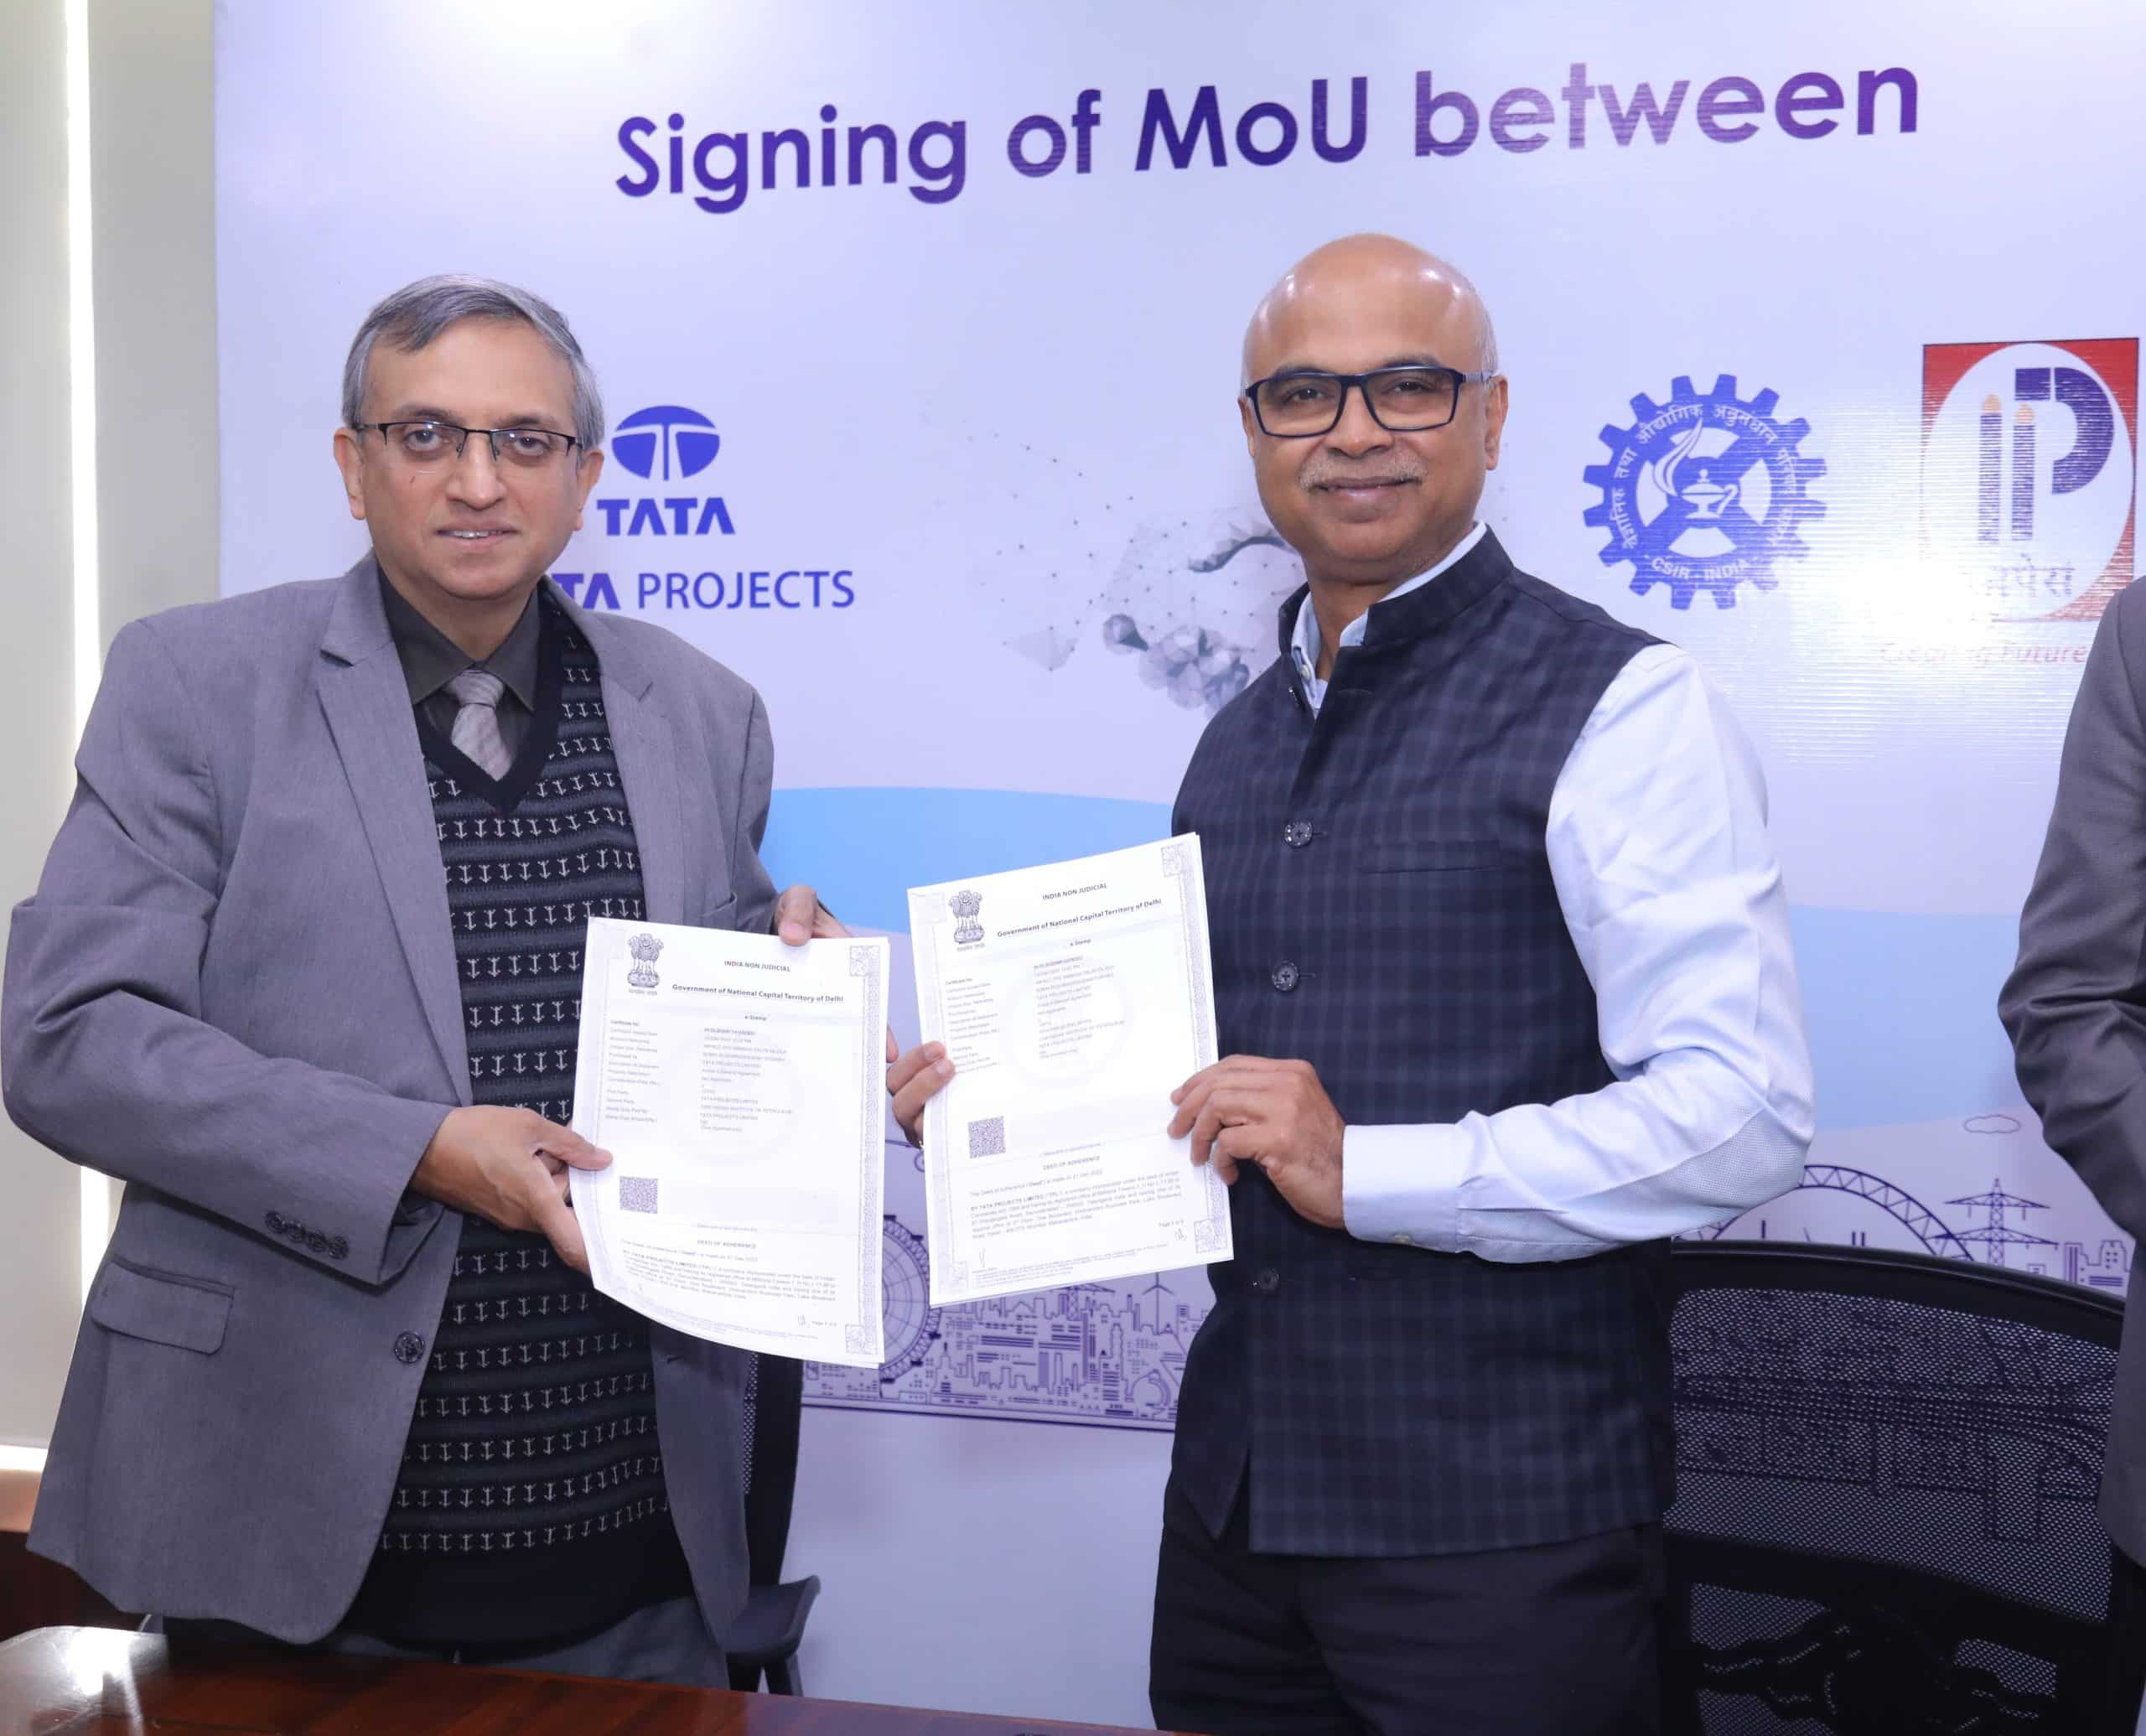 Dr Anjan Ray, Director - CSIR-IIP and Mr Vinayak Pai, Managing Director - TATA Projects Ltd signing the MoU